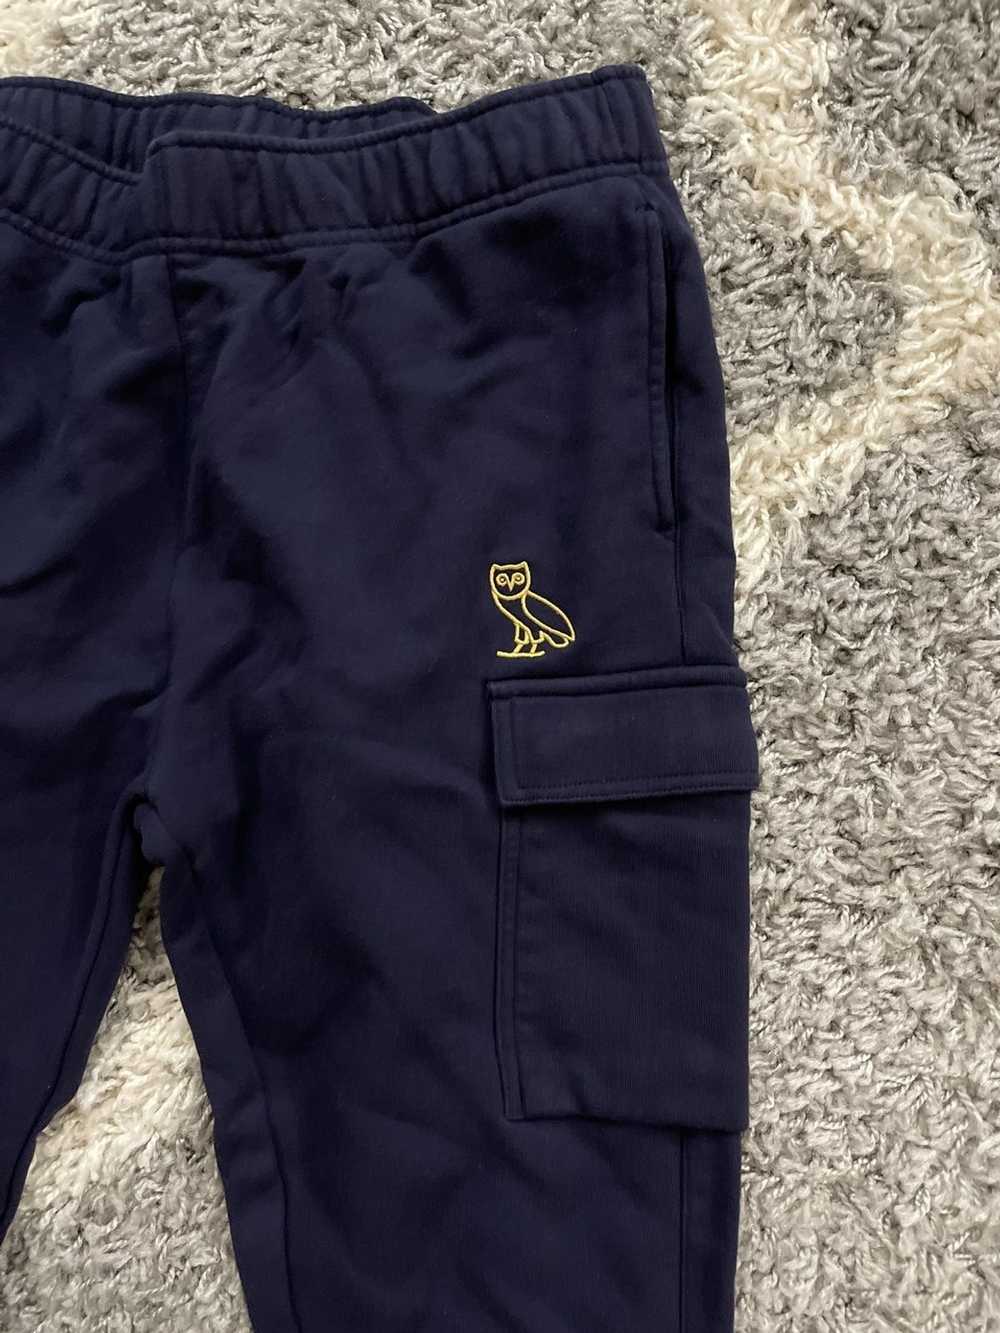 Octobers Very Own OVO Octobers Very Own Navy Jogg… - image 3